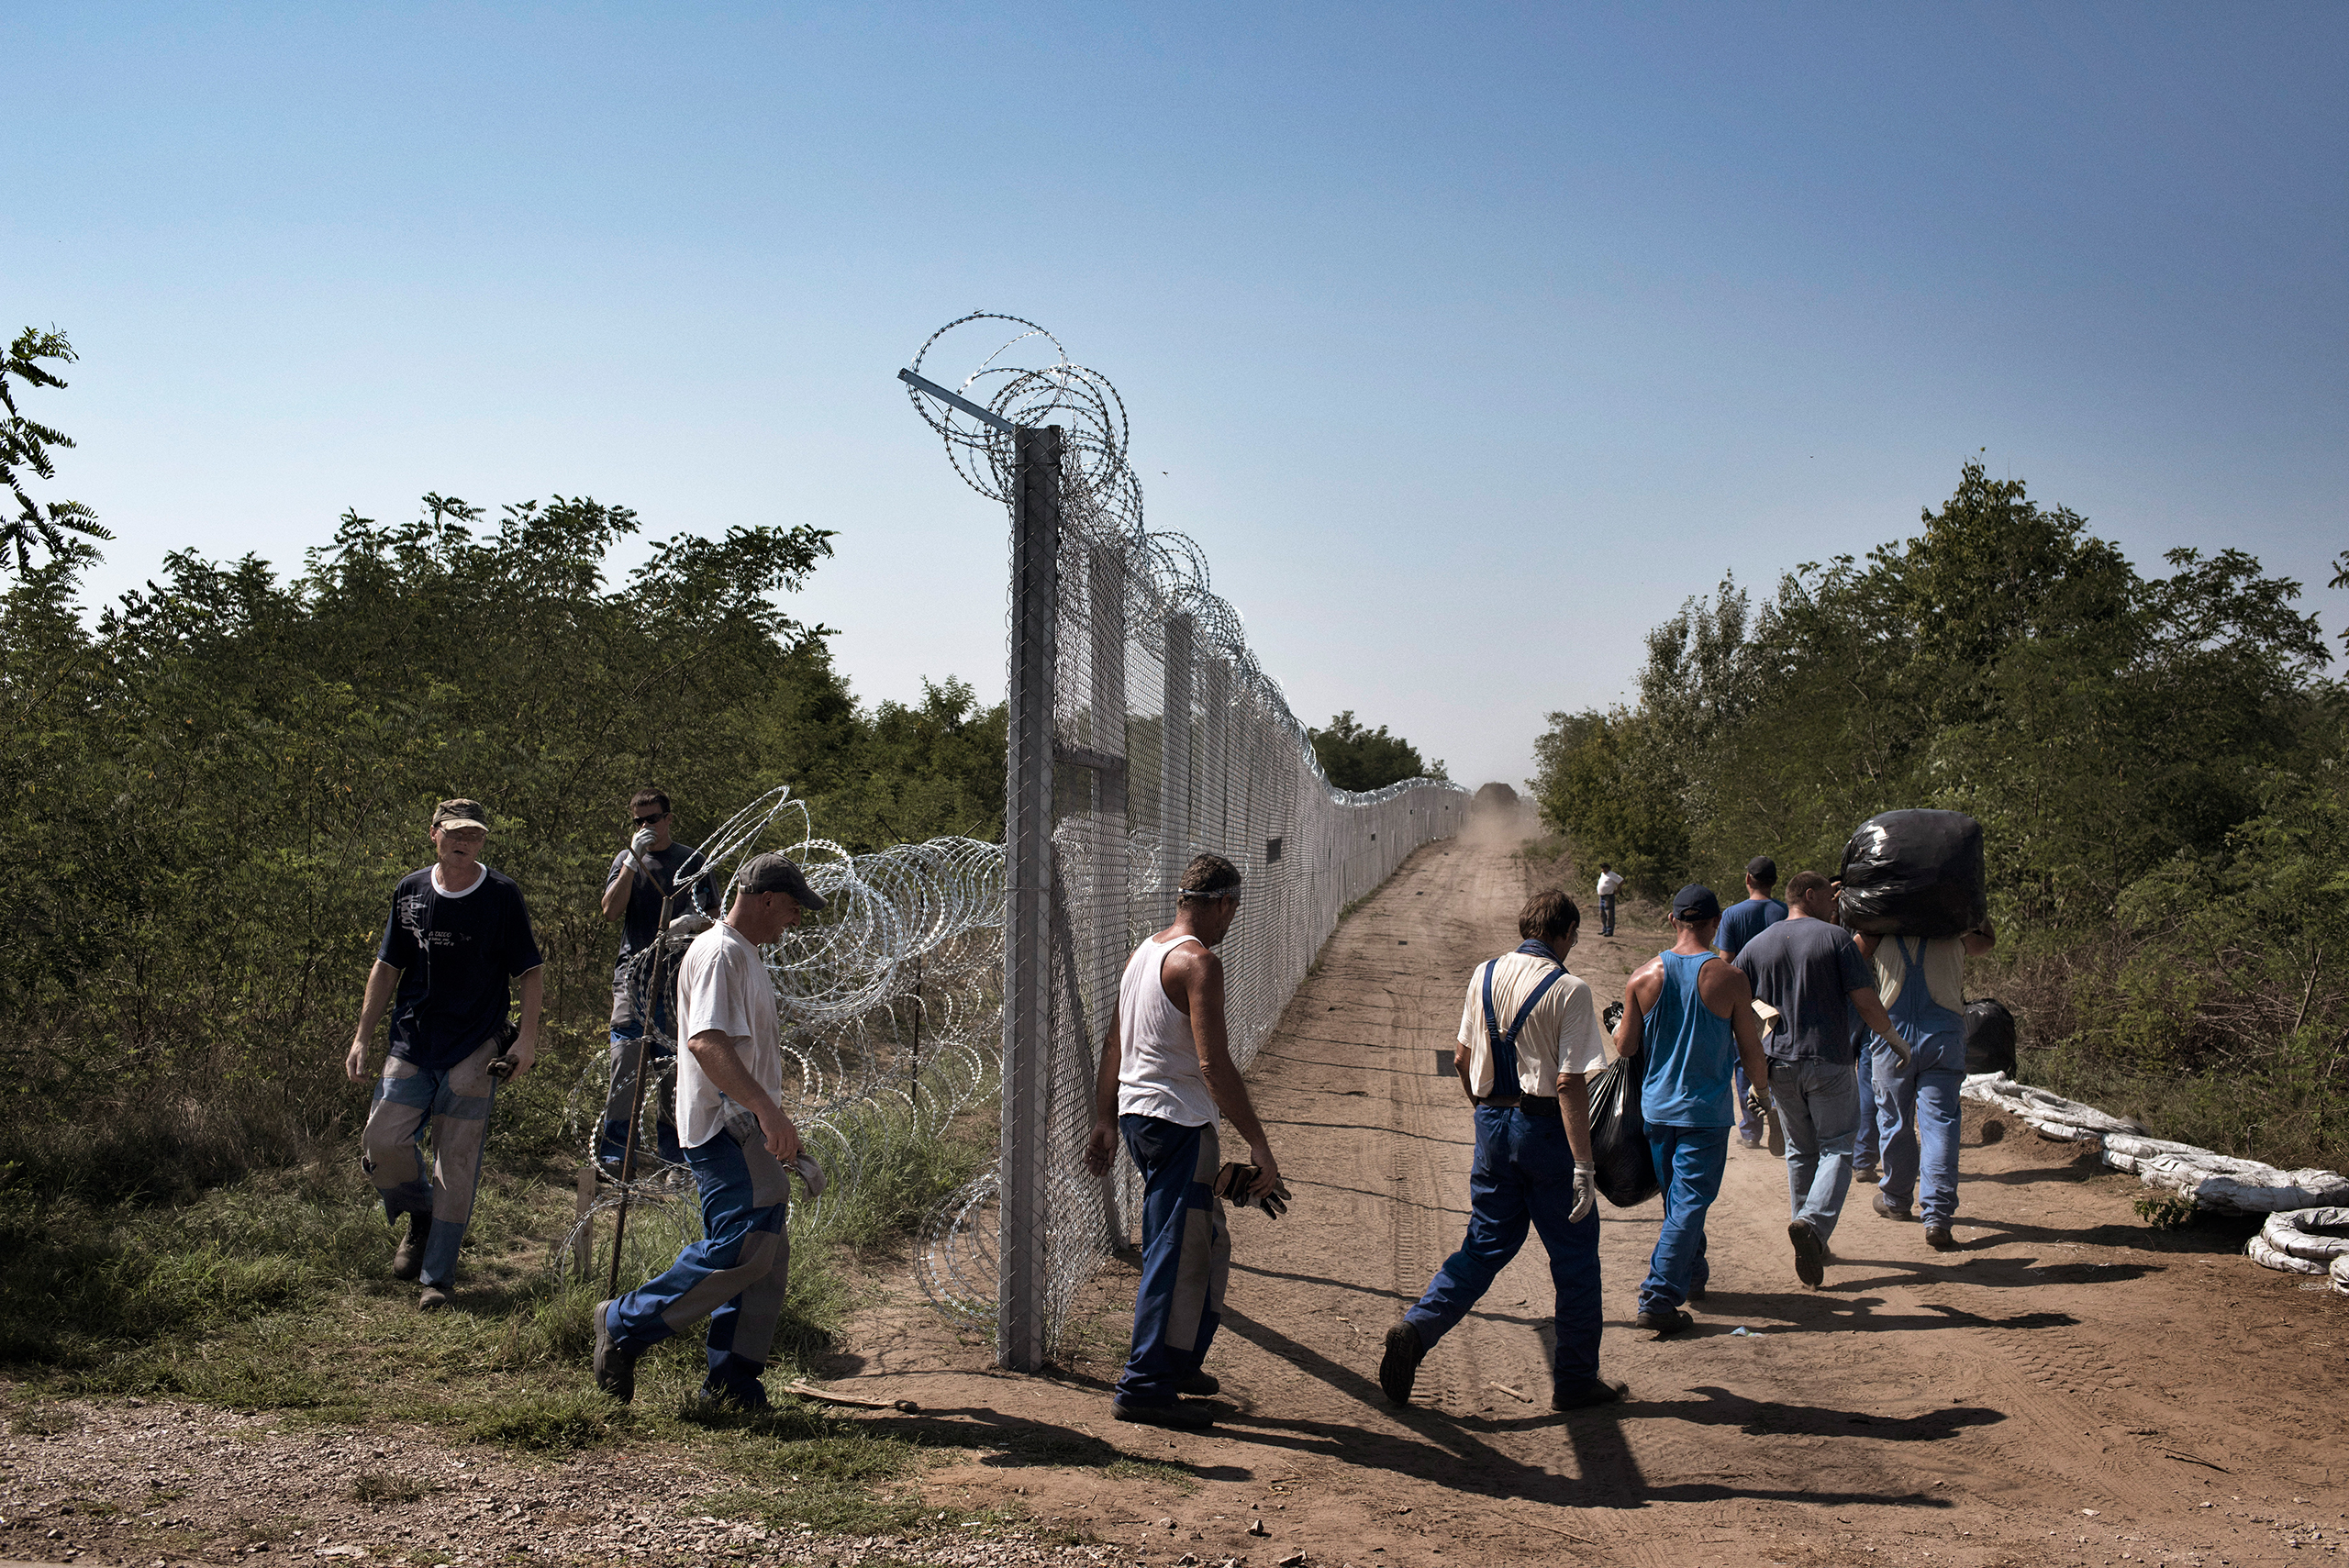 Local workers build up a fence to guard against migrants in Ásotthalom, Hungary, September 2015. (Yuri Kozyrev—NOOR for TIME)